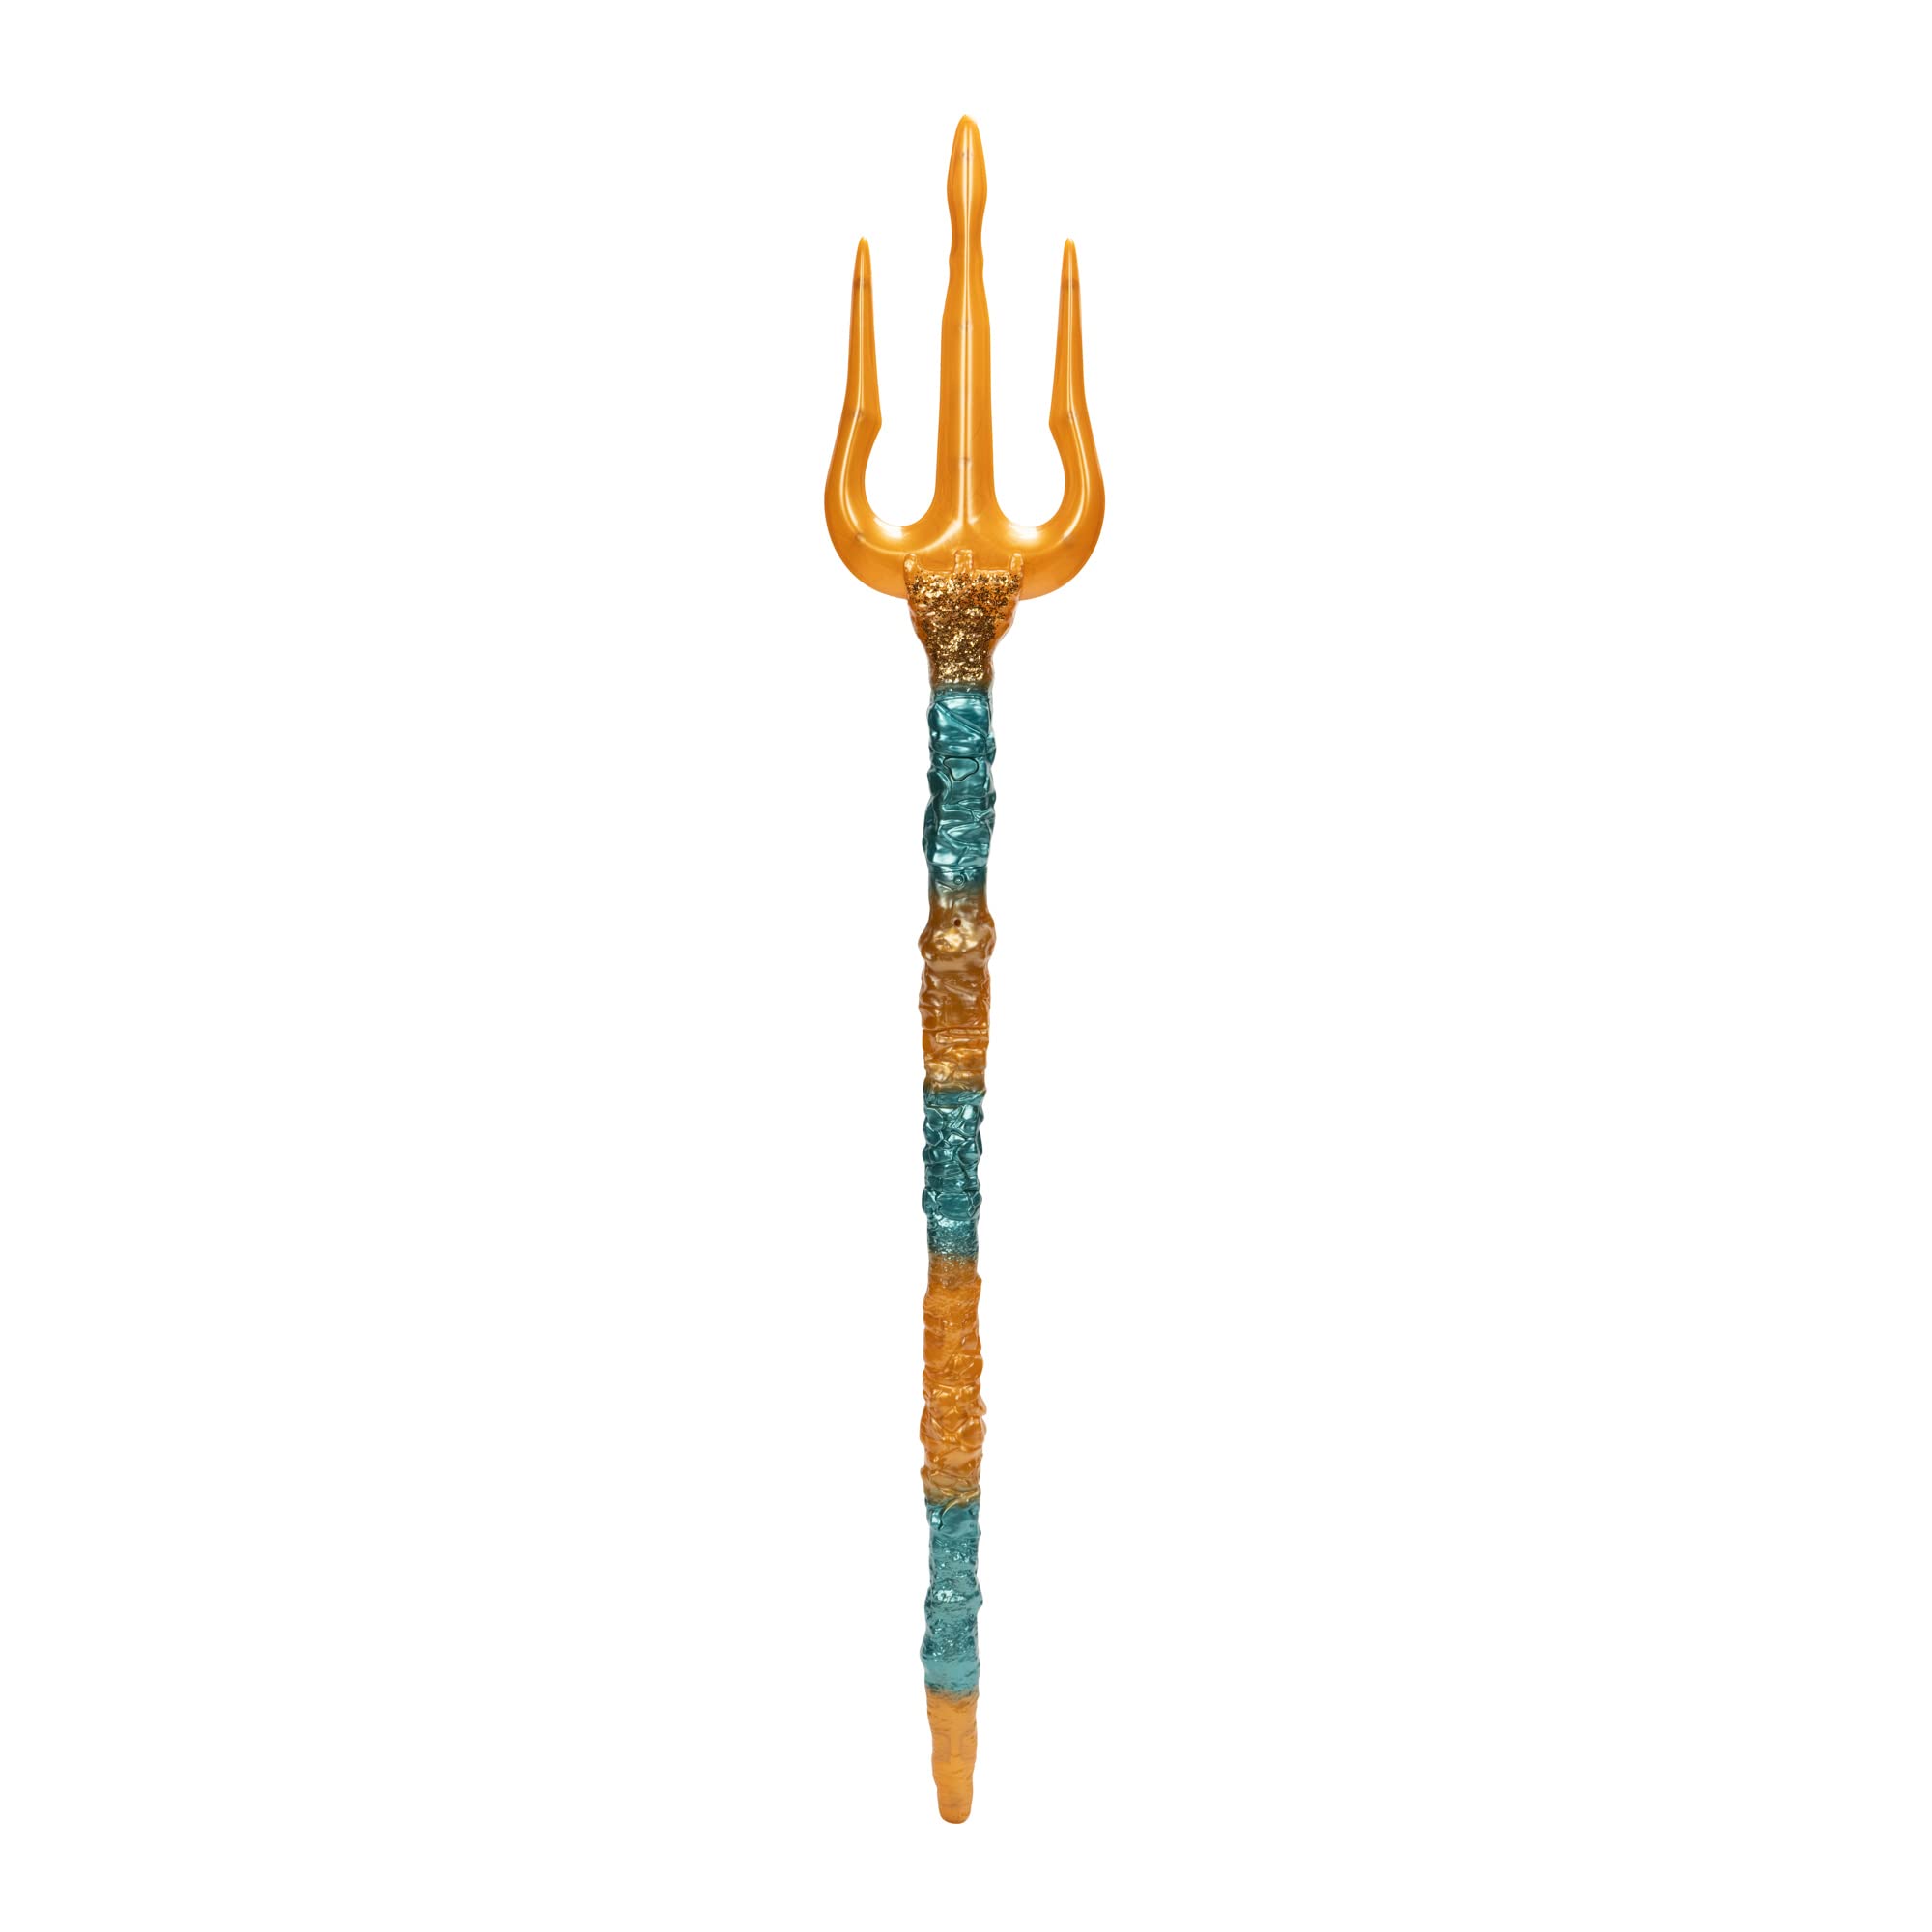 Disney The Little Mermaid King Triton’s All-Powerful Trident, 36 Inches Long with Motion Activated Lights and Sound Effects! Command The Seas Like King Triton!